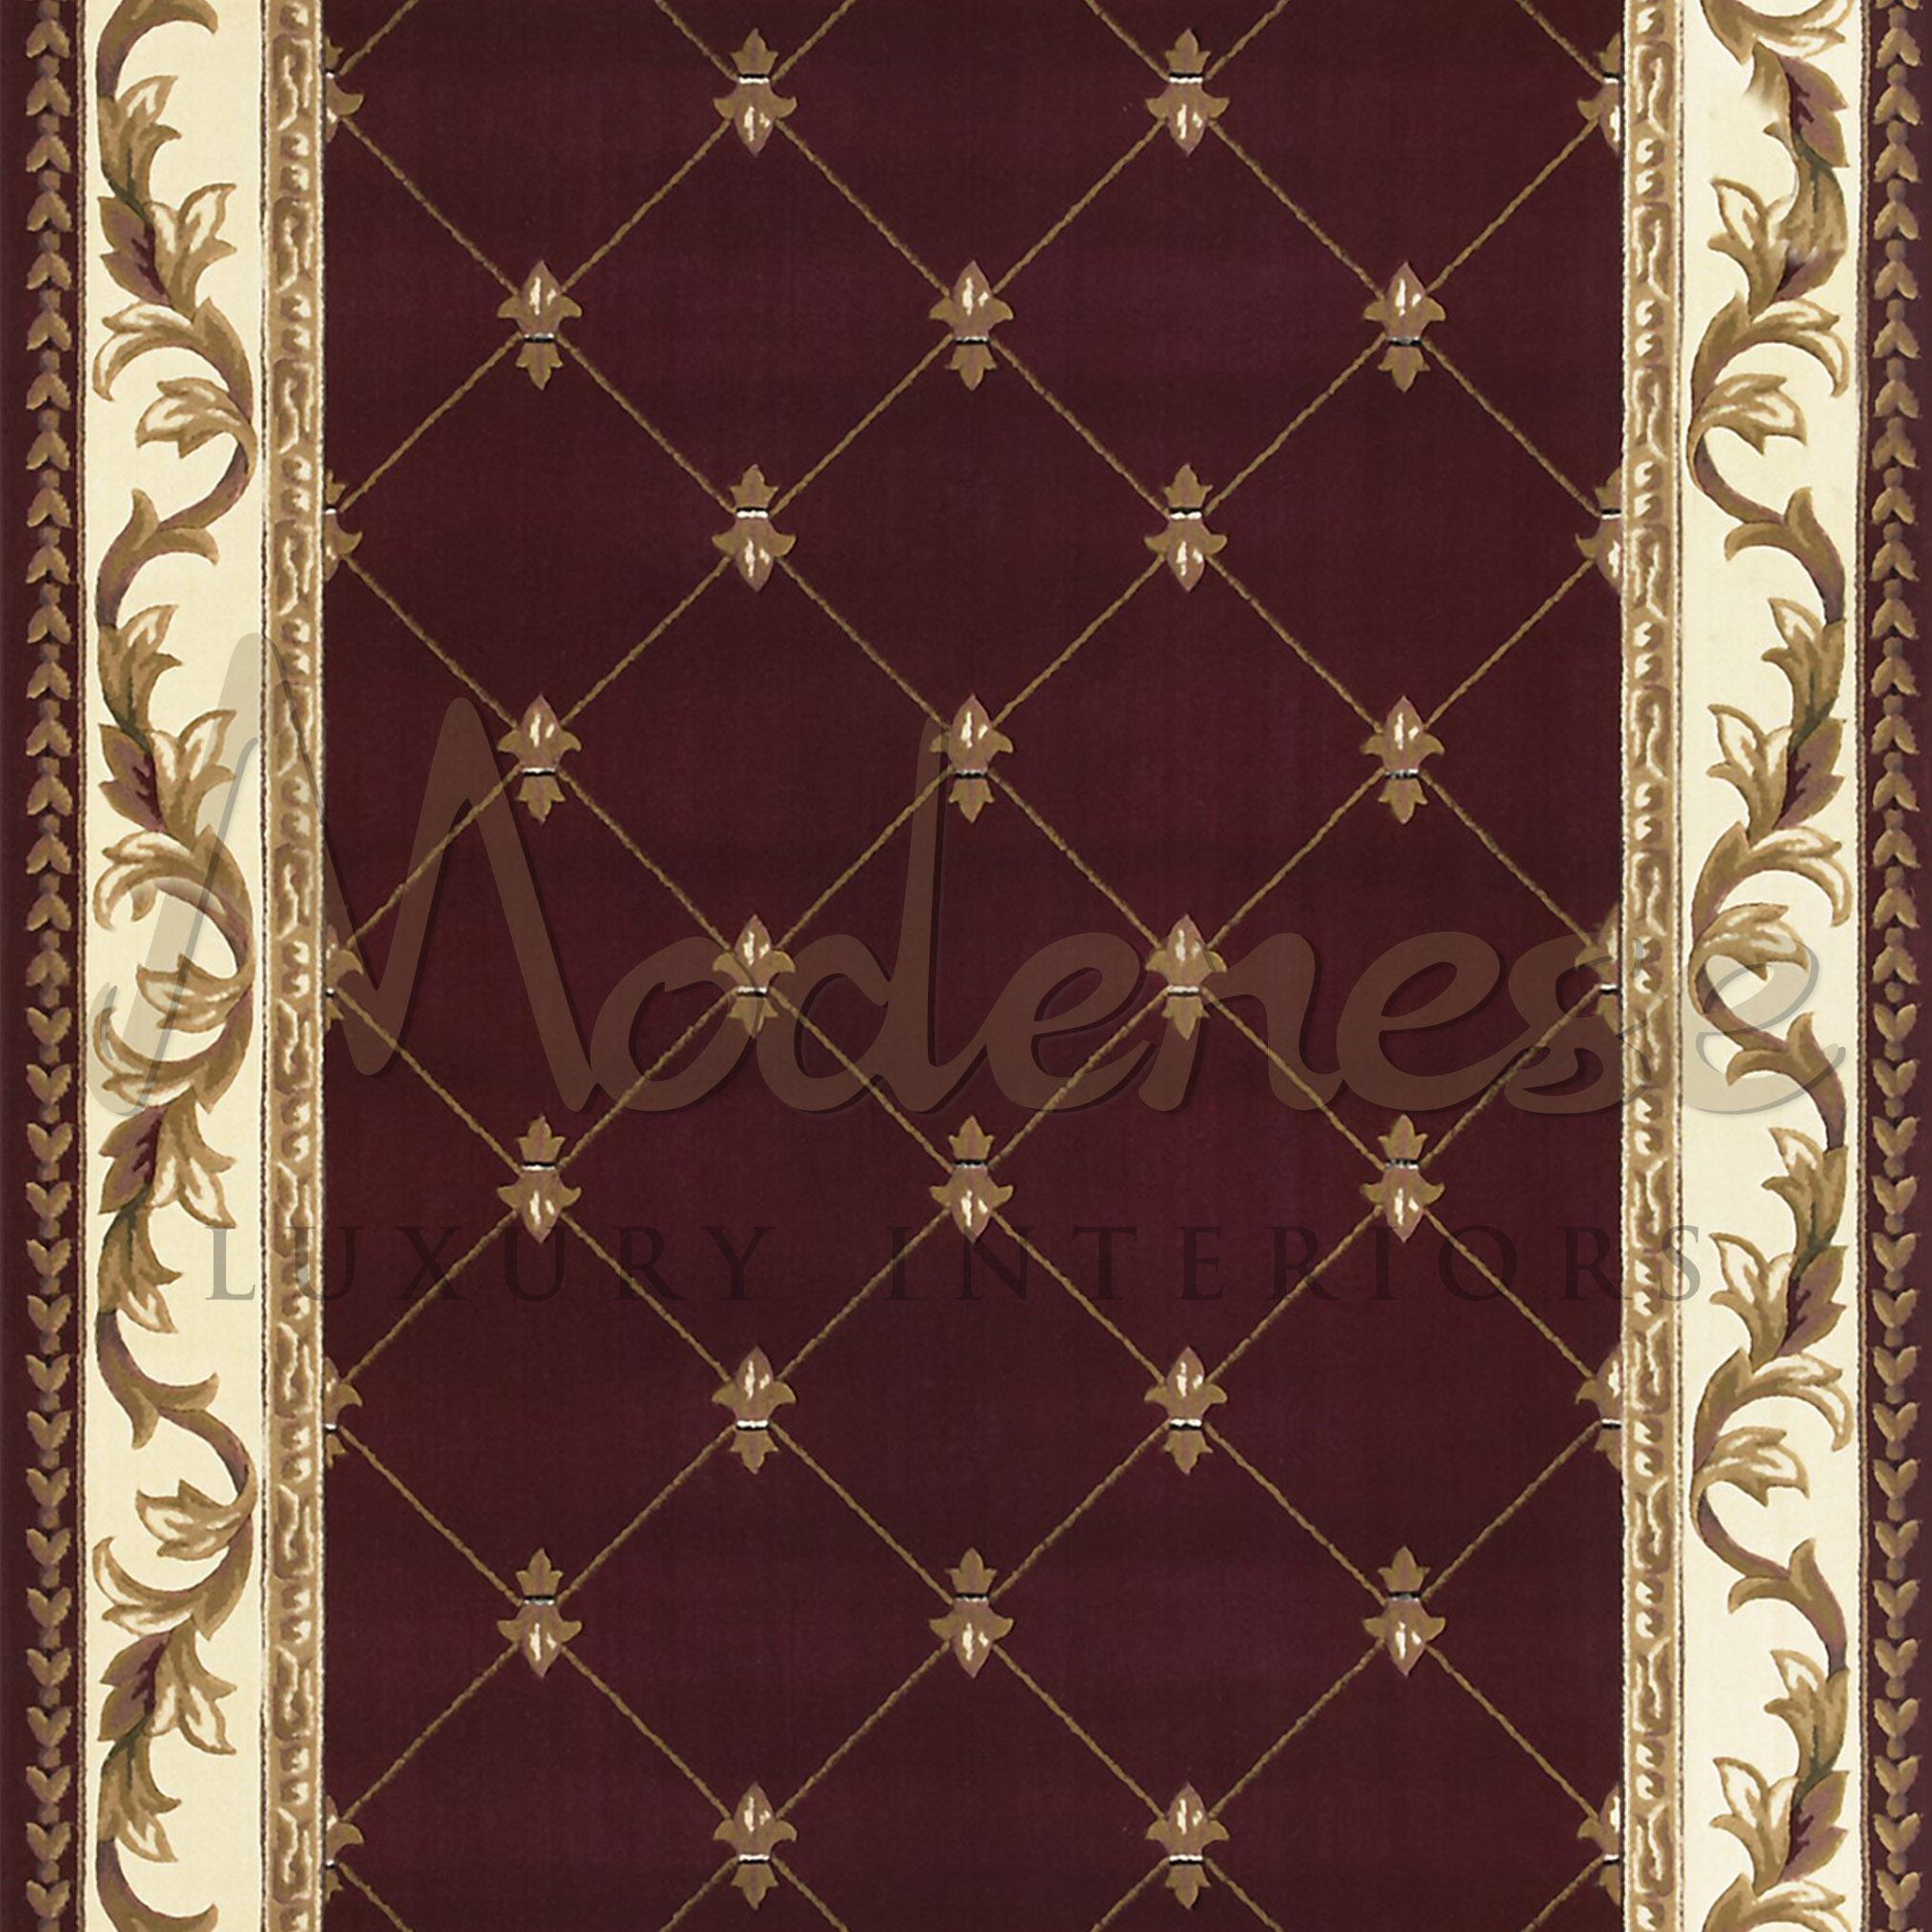 Bright 100% bamboo silk persian rug handknotted by experienced Italian artisans for the interior design brand Modenese Luxury Interiors. This rug goes best with classical furniture in private penthouses. Rectangular shape with rhomboidal pattern of